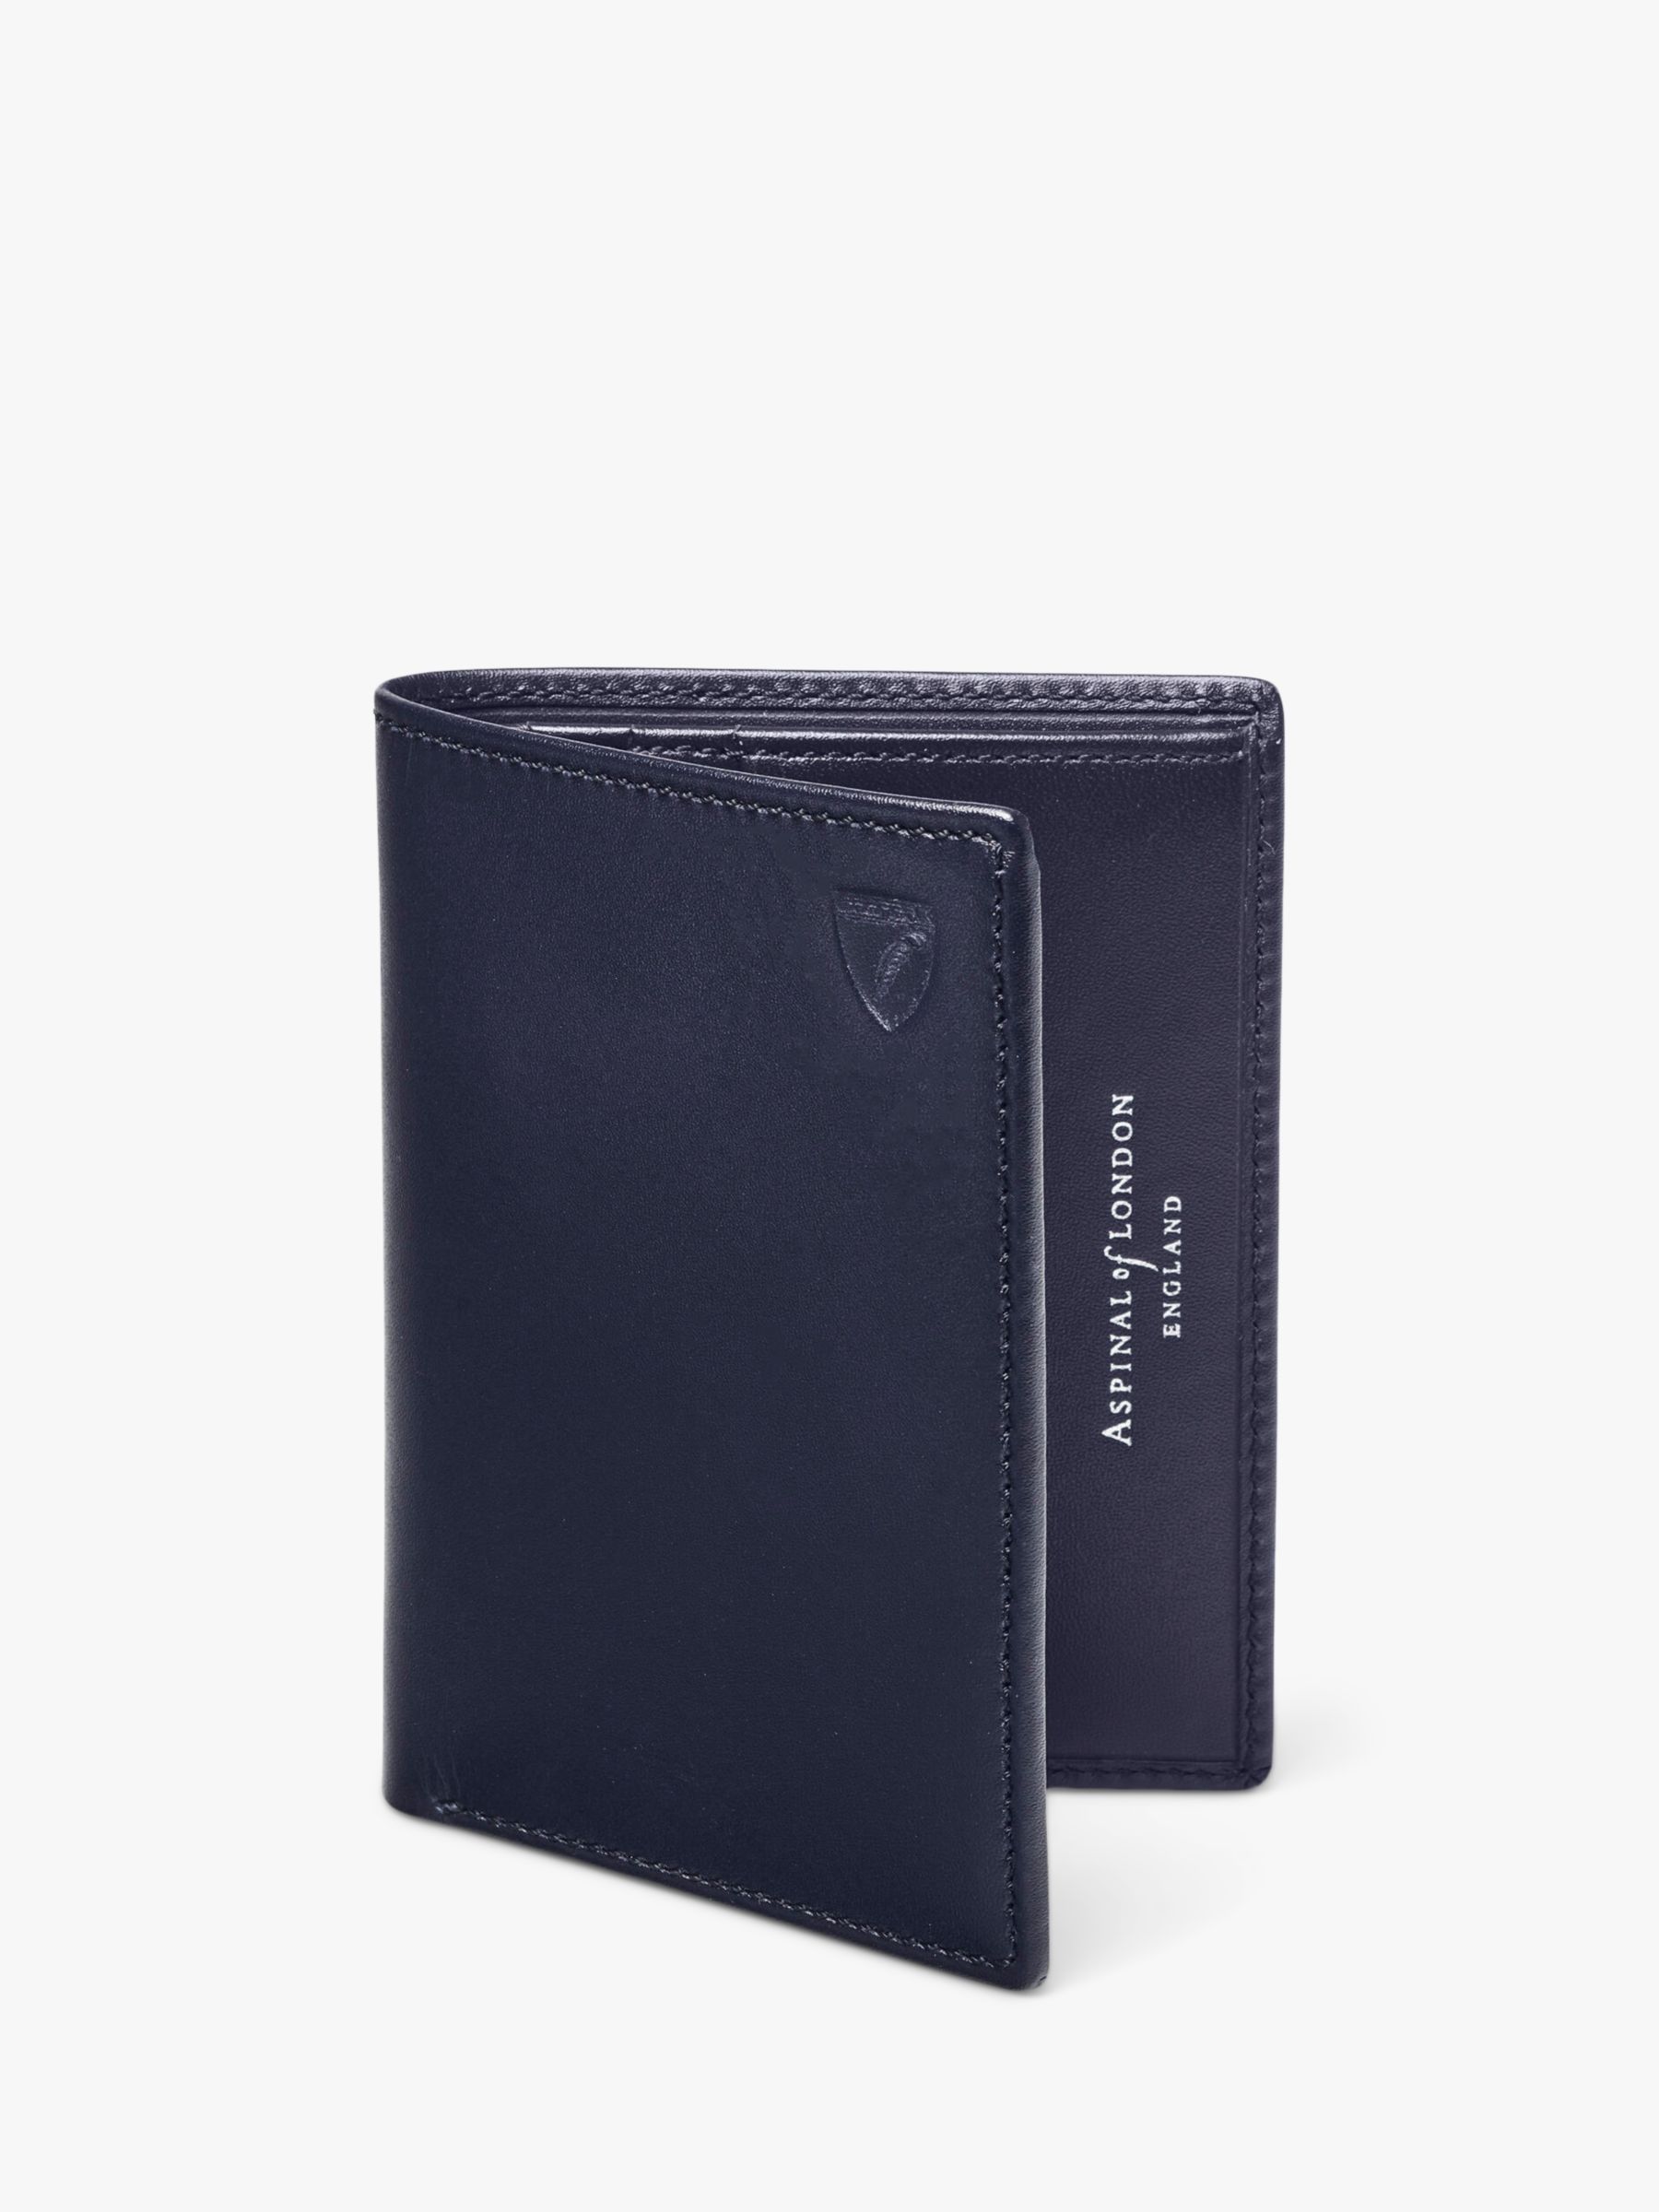 Aspinal of London Smooth Leather Double Credit Card Wallet, Navy